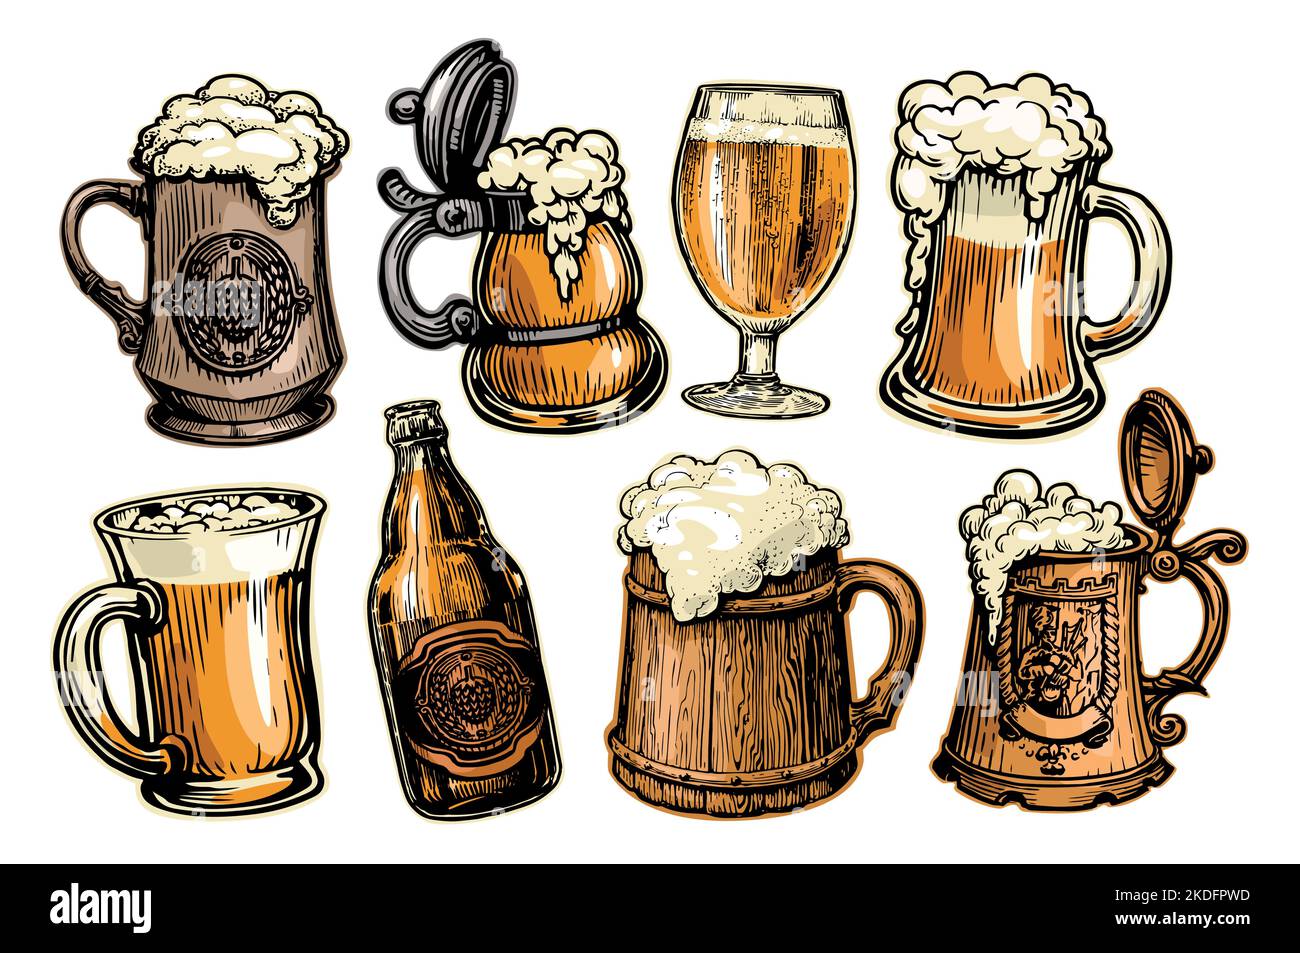 Beer set vector. Collection of glasses, mugs and bottles with alcoholic drinks for restaurant or pub menu design Stock Vector